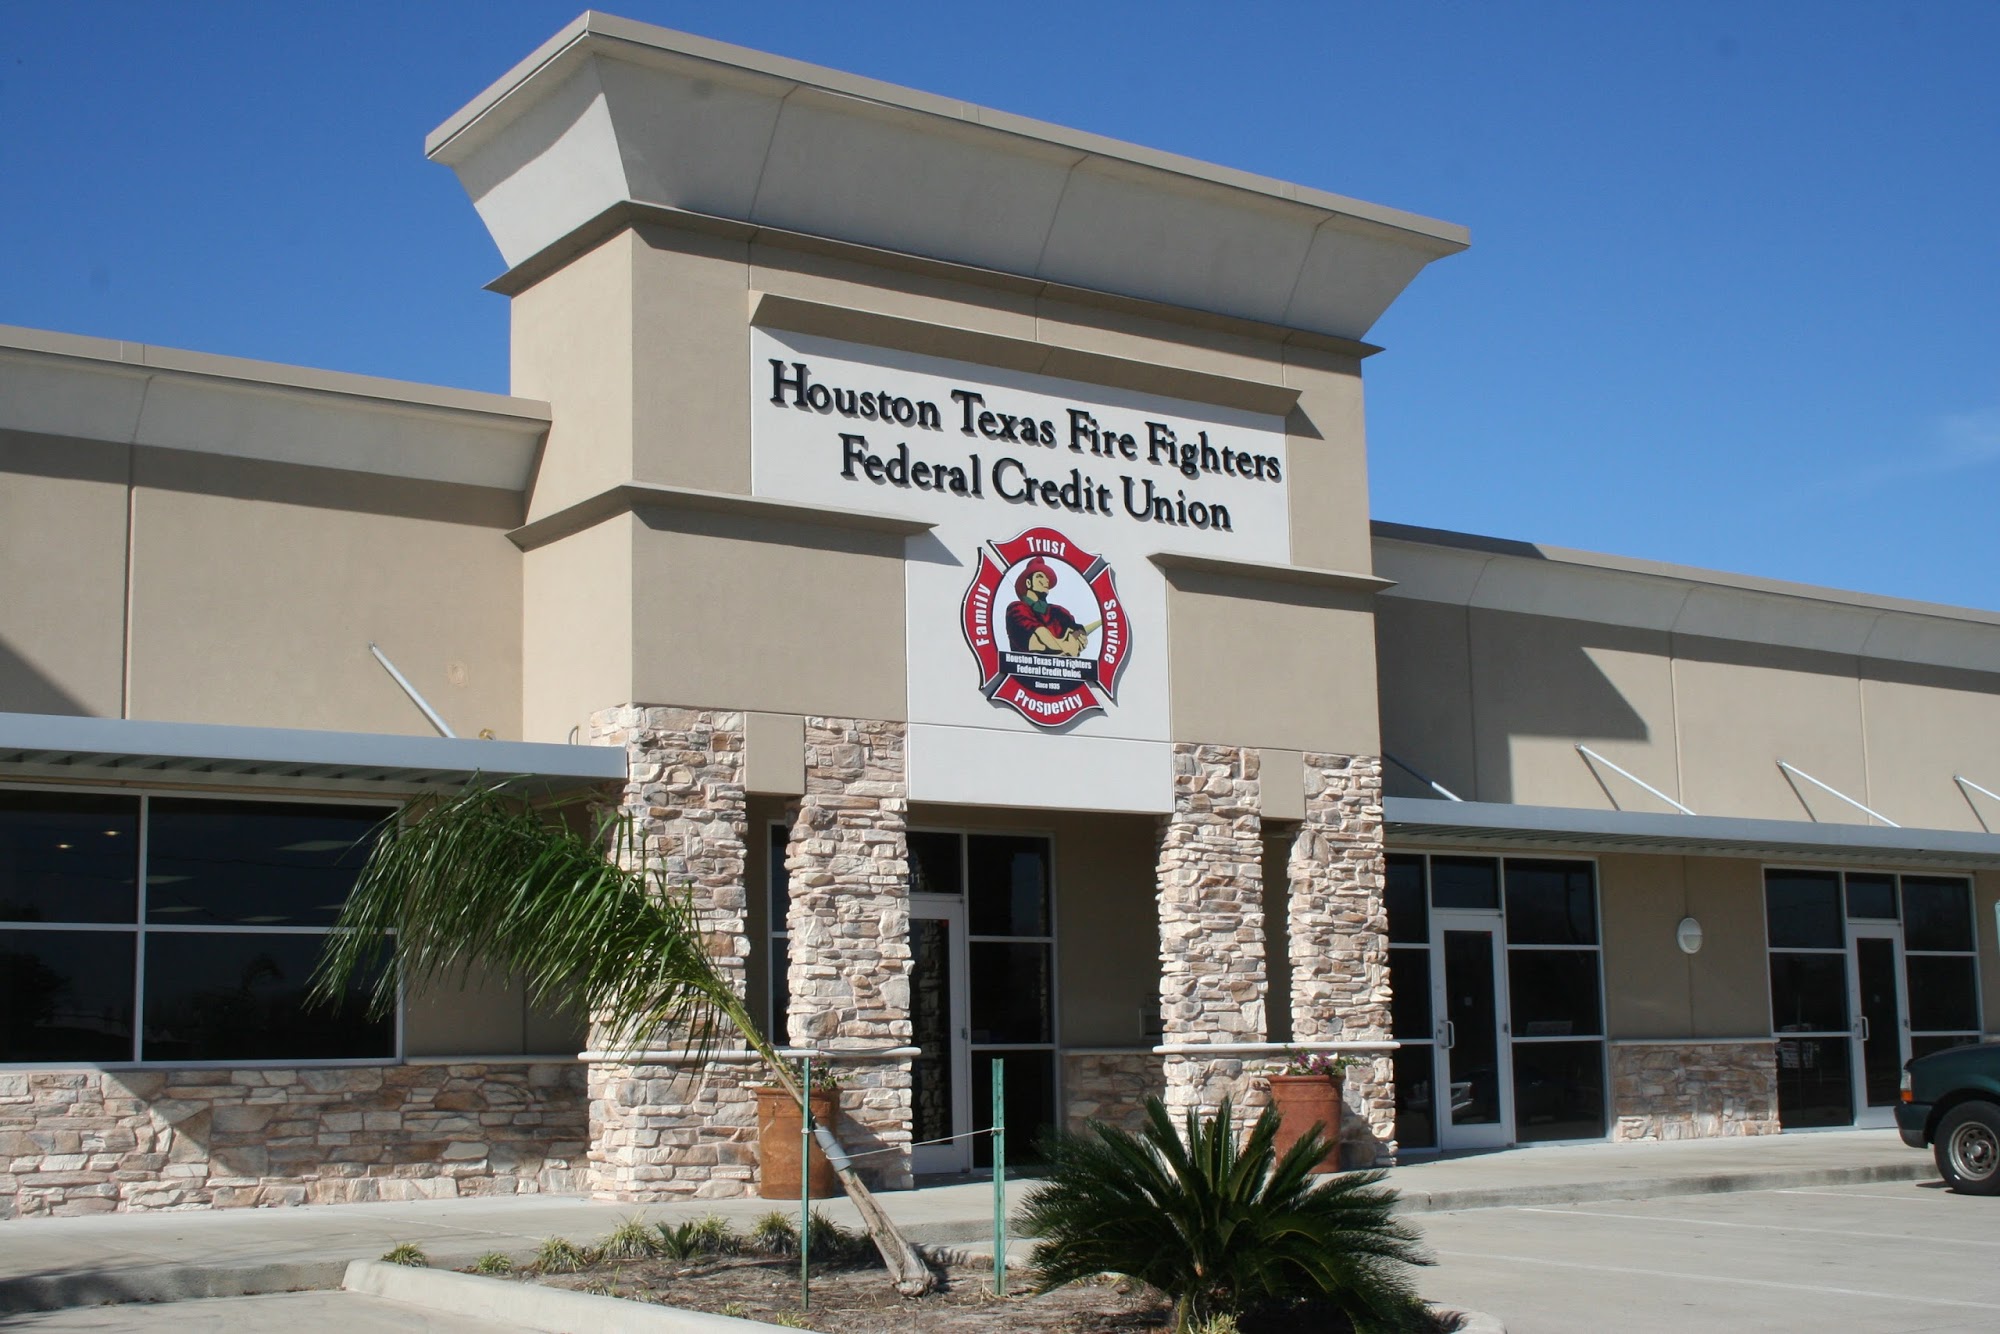 Houston Texas Fire Fighters FCU | South Branch